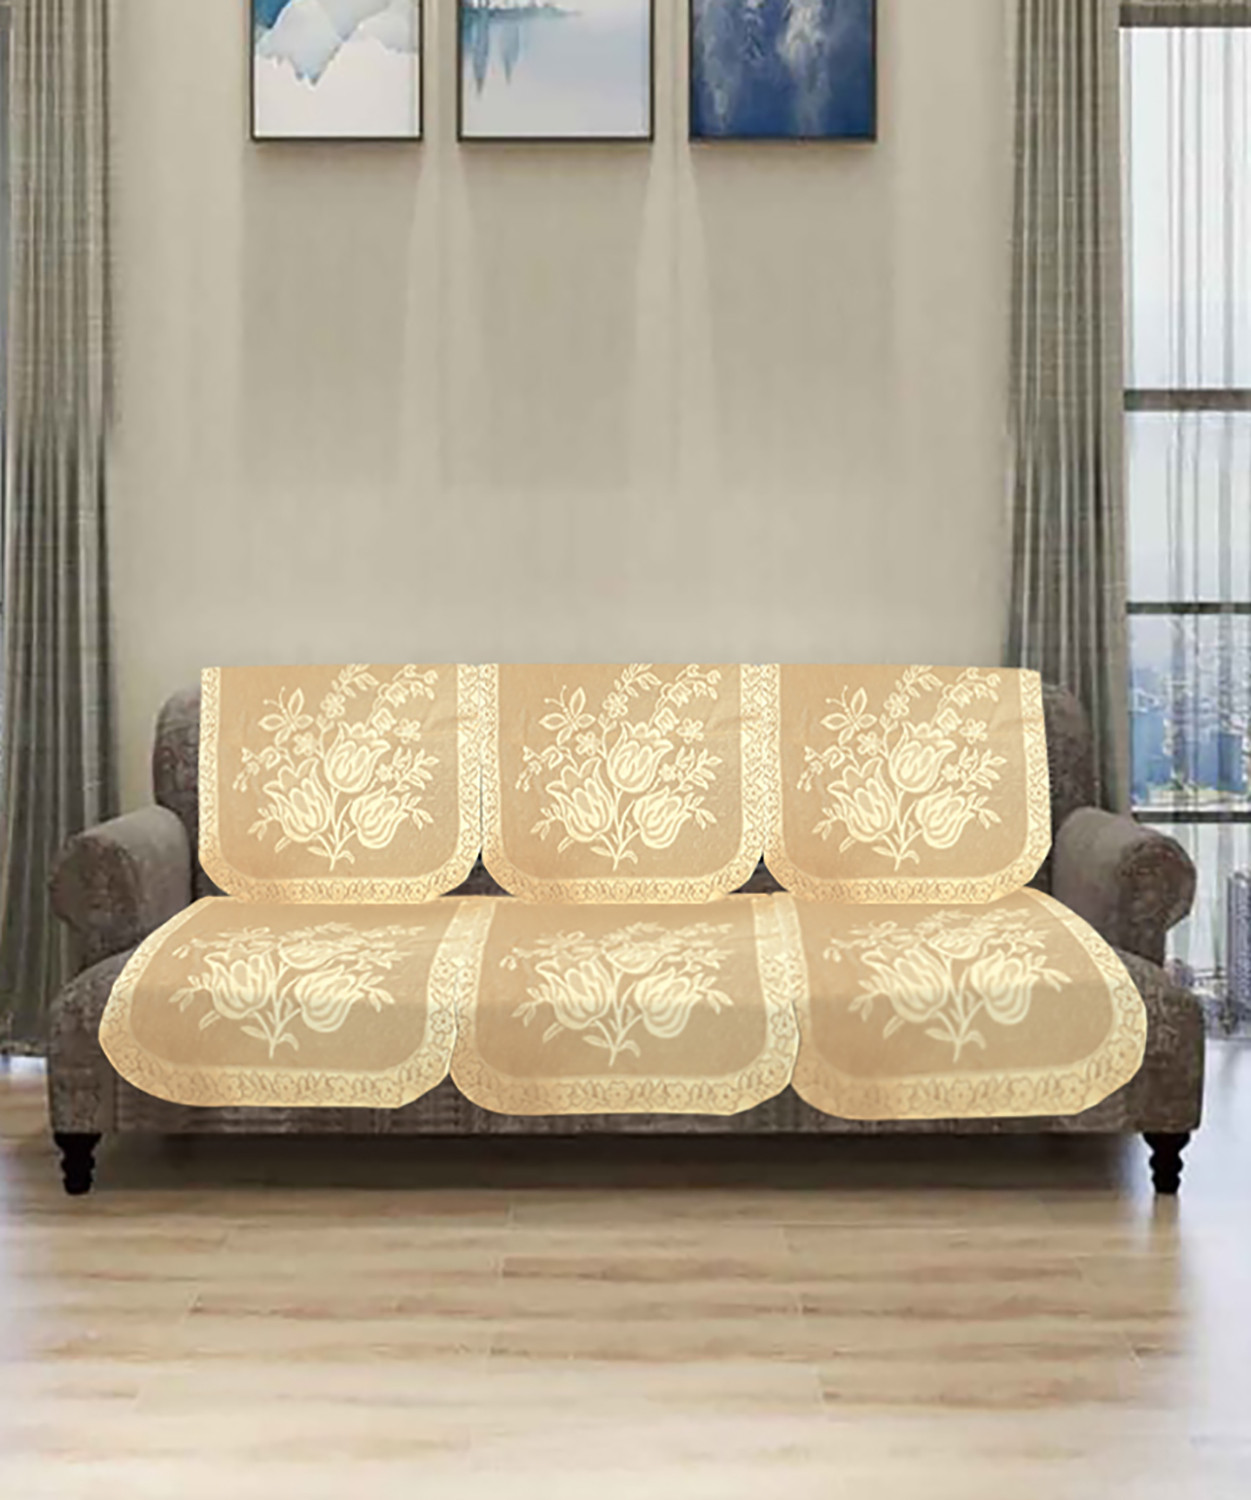 Kuber Industries Flower Printed 3 Seater Cotton Sofa Cover Set (Cream)-44KM0583